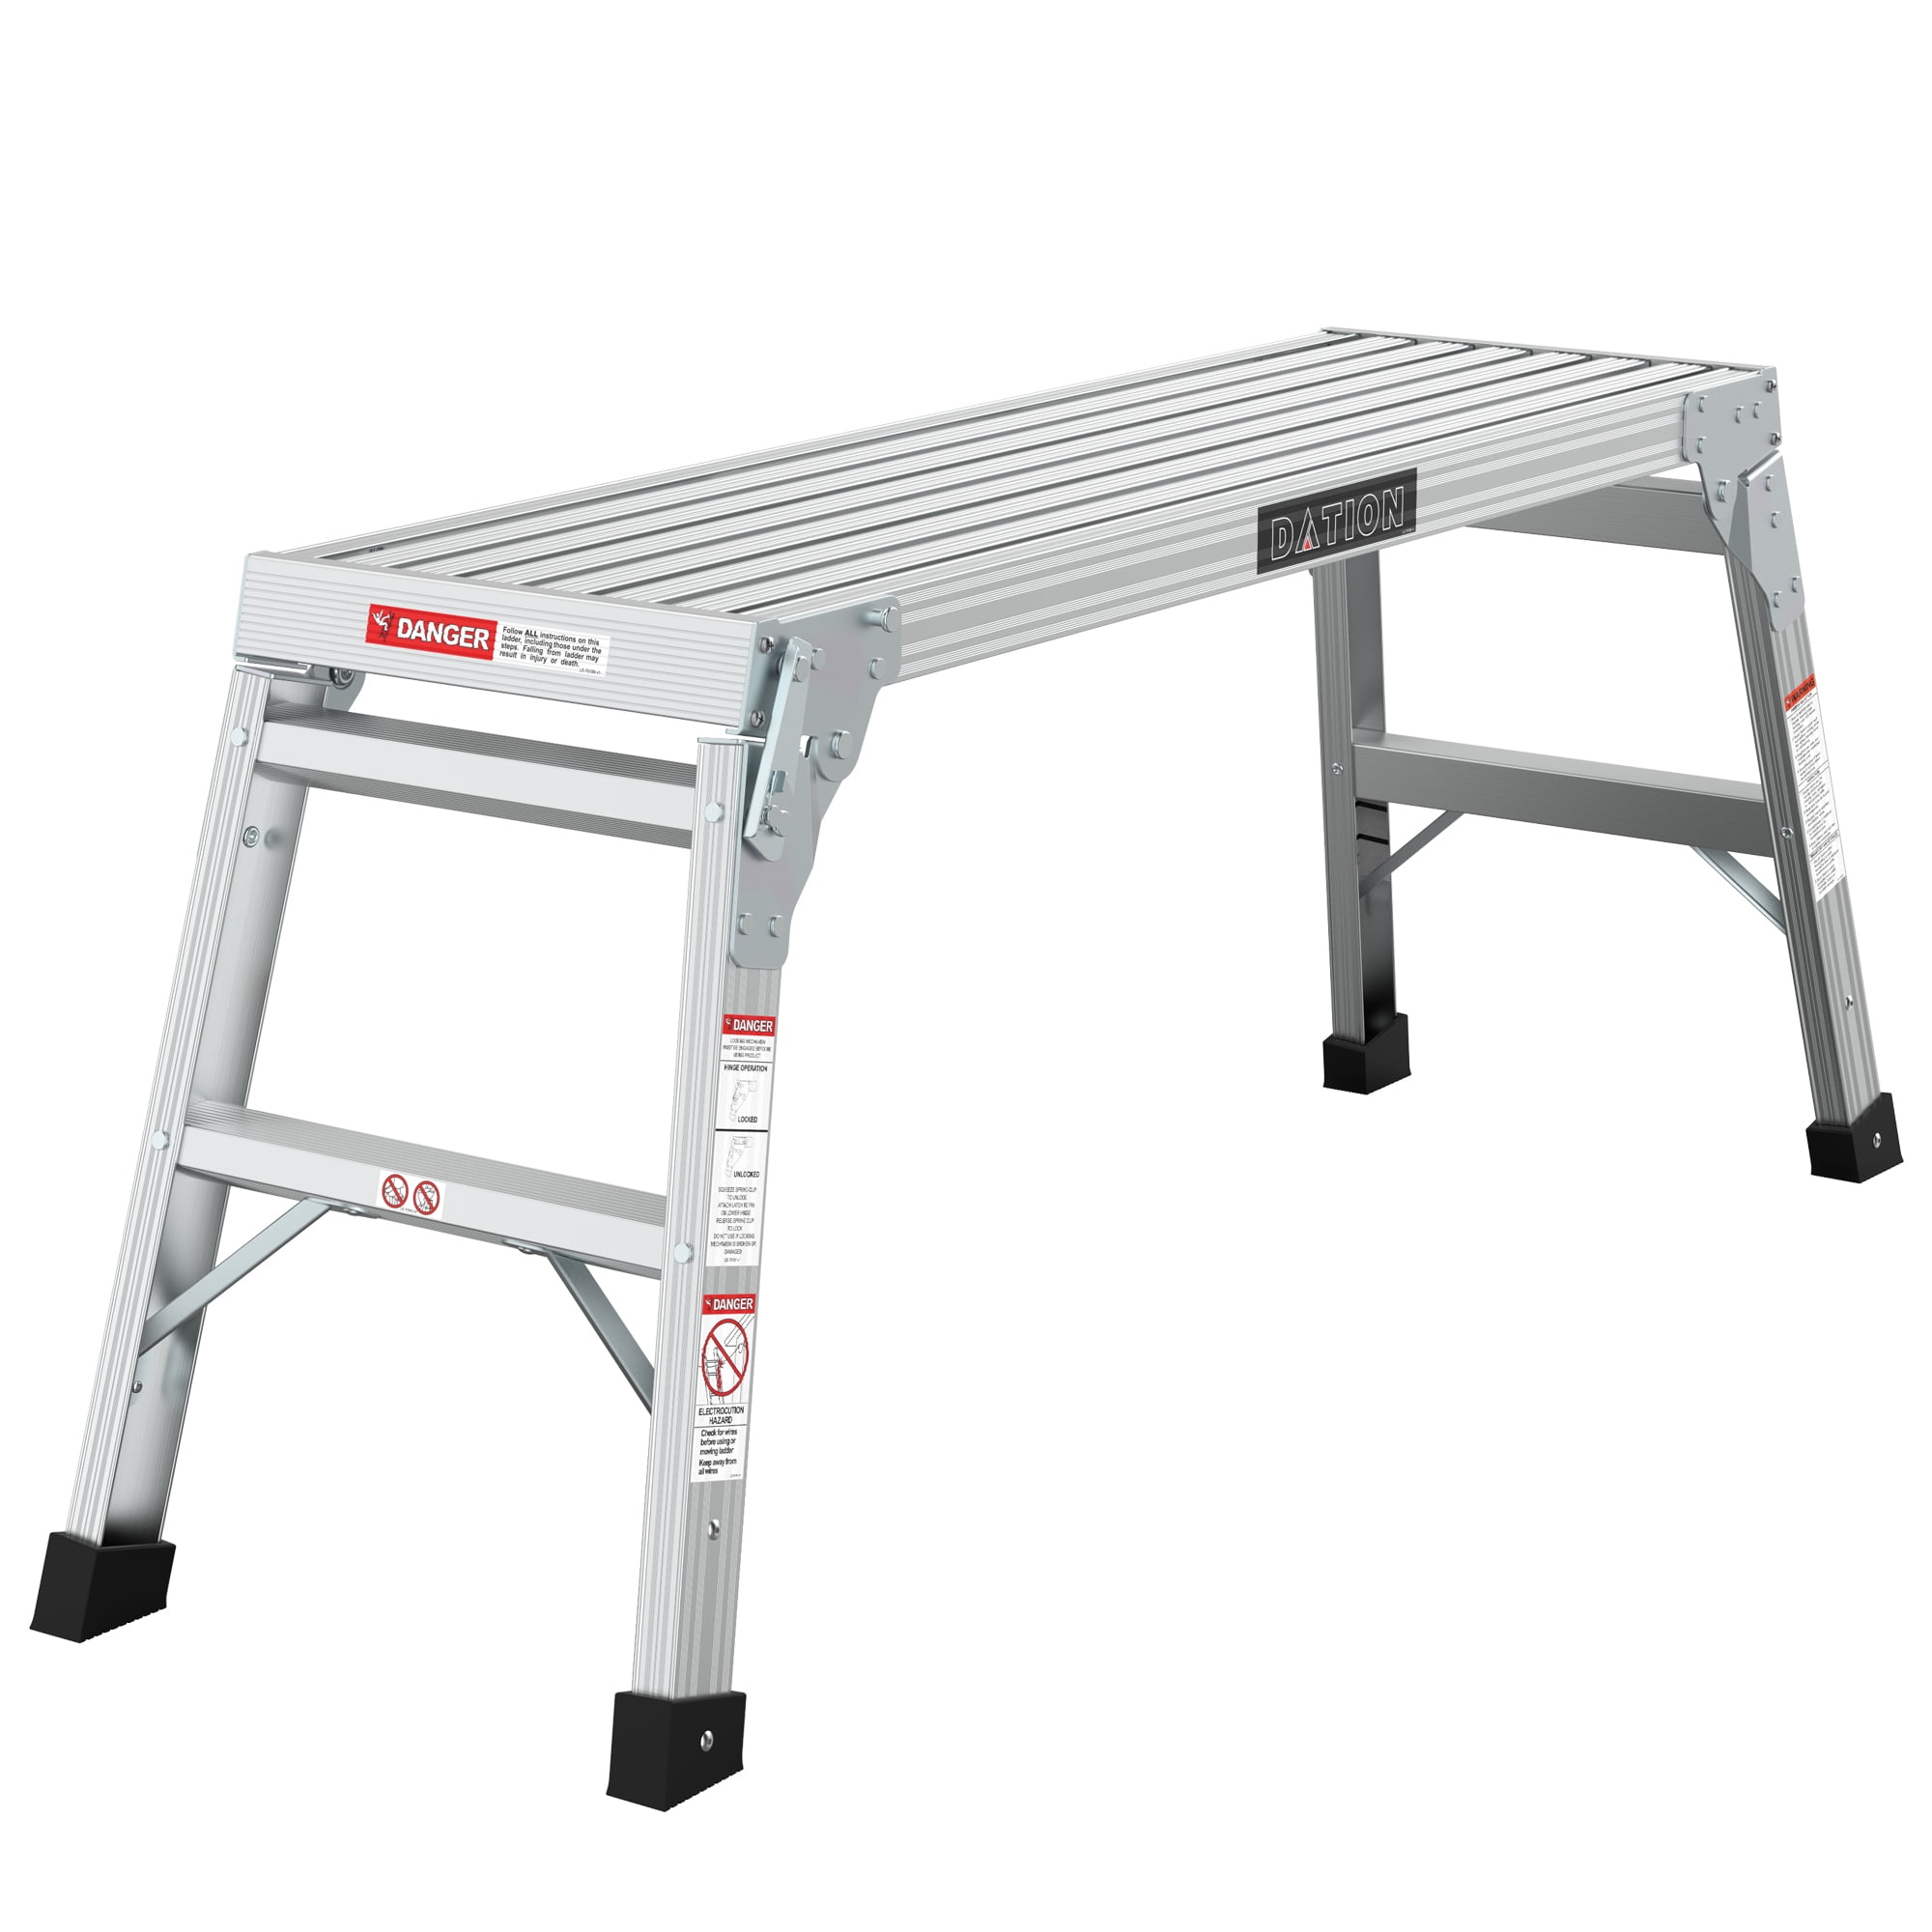 Work Platform Aluminum Step Ladder, Portable Bench Folding Ladders Stool  with Non-Slip Matb, Drywall Safe ANSI Approved of Capacity 225 LBS, Medium  Duty Multifunctional Ladder 